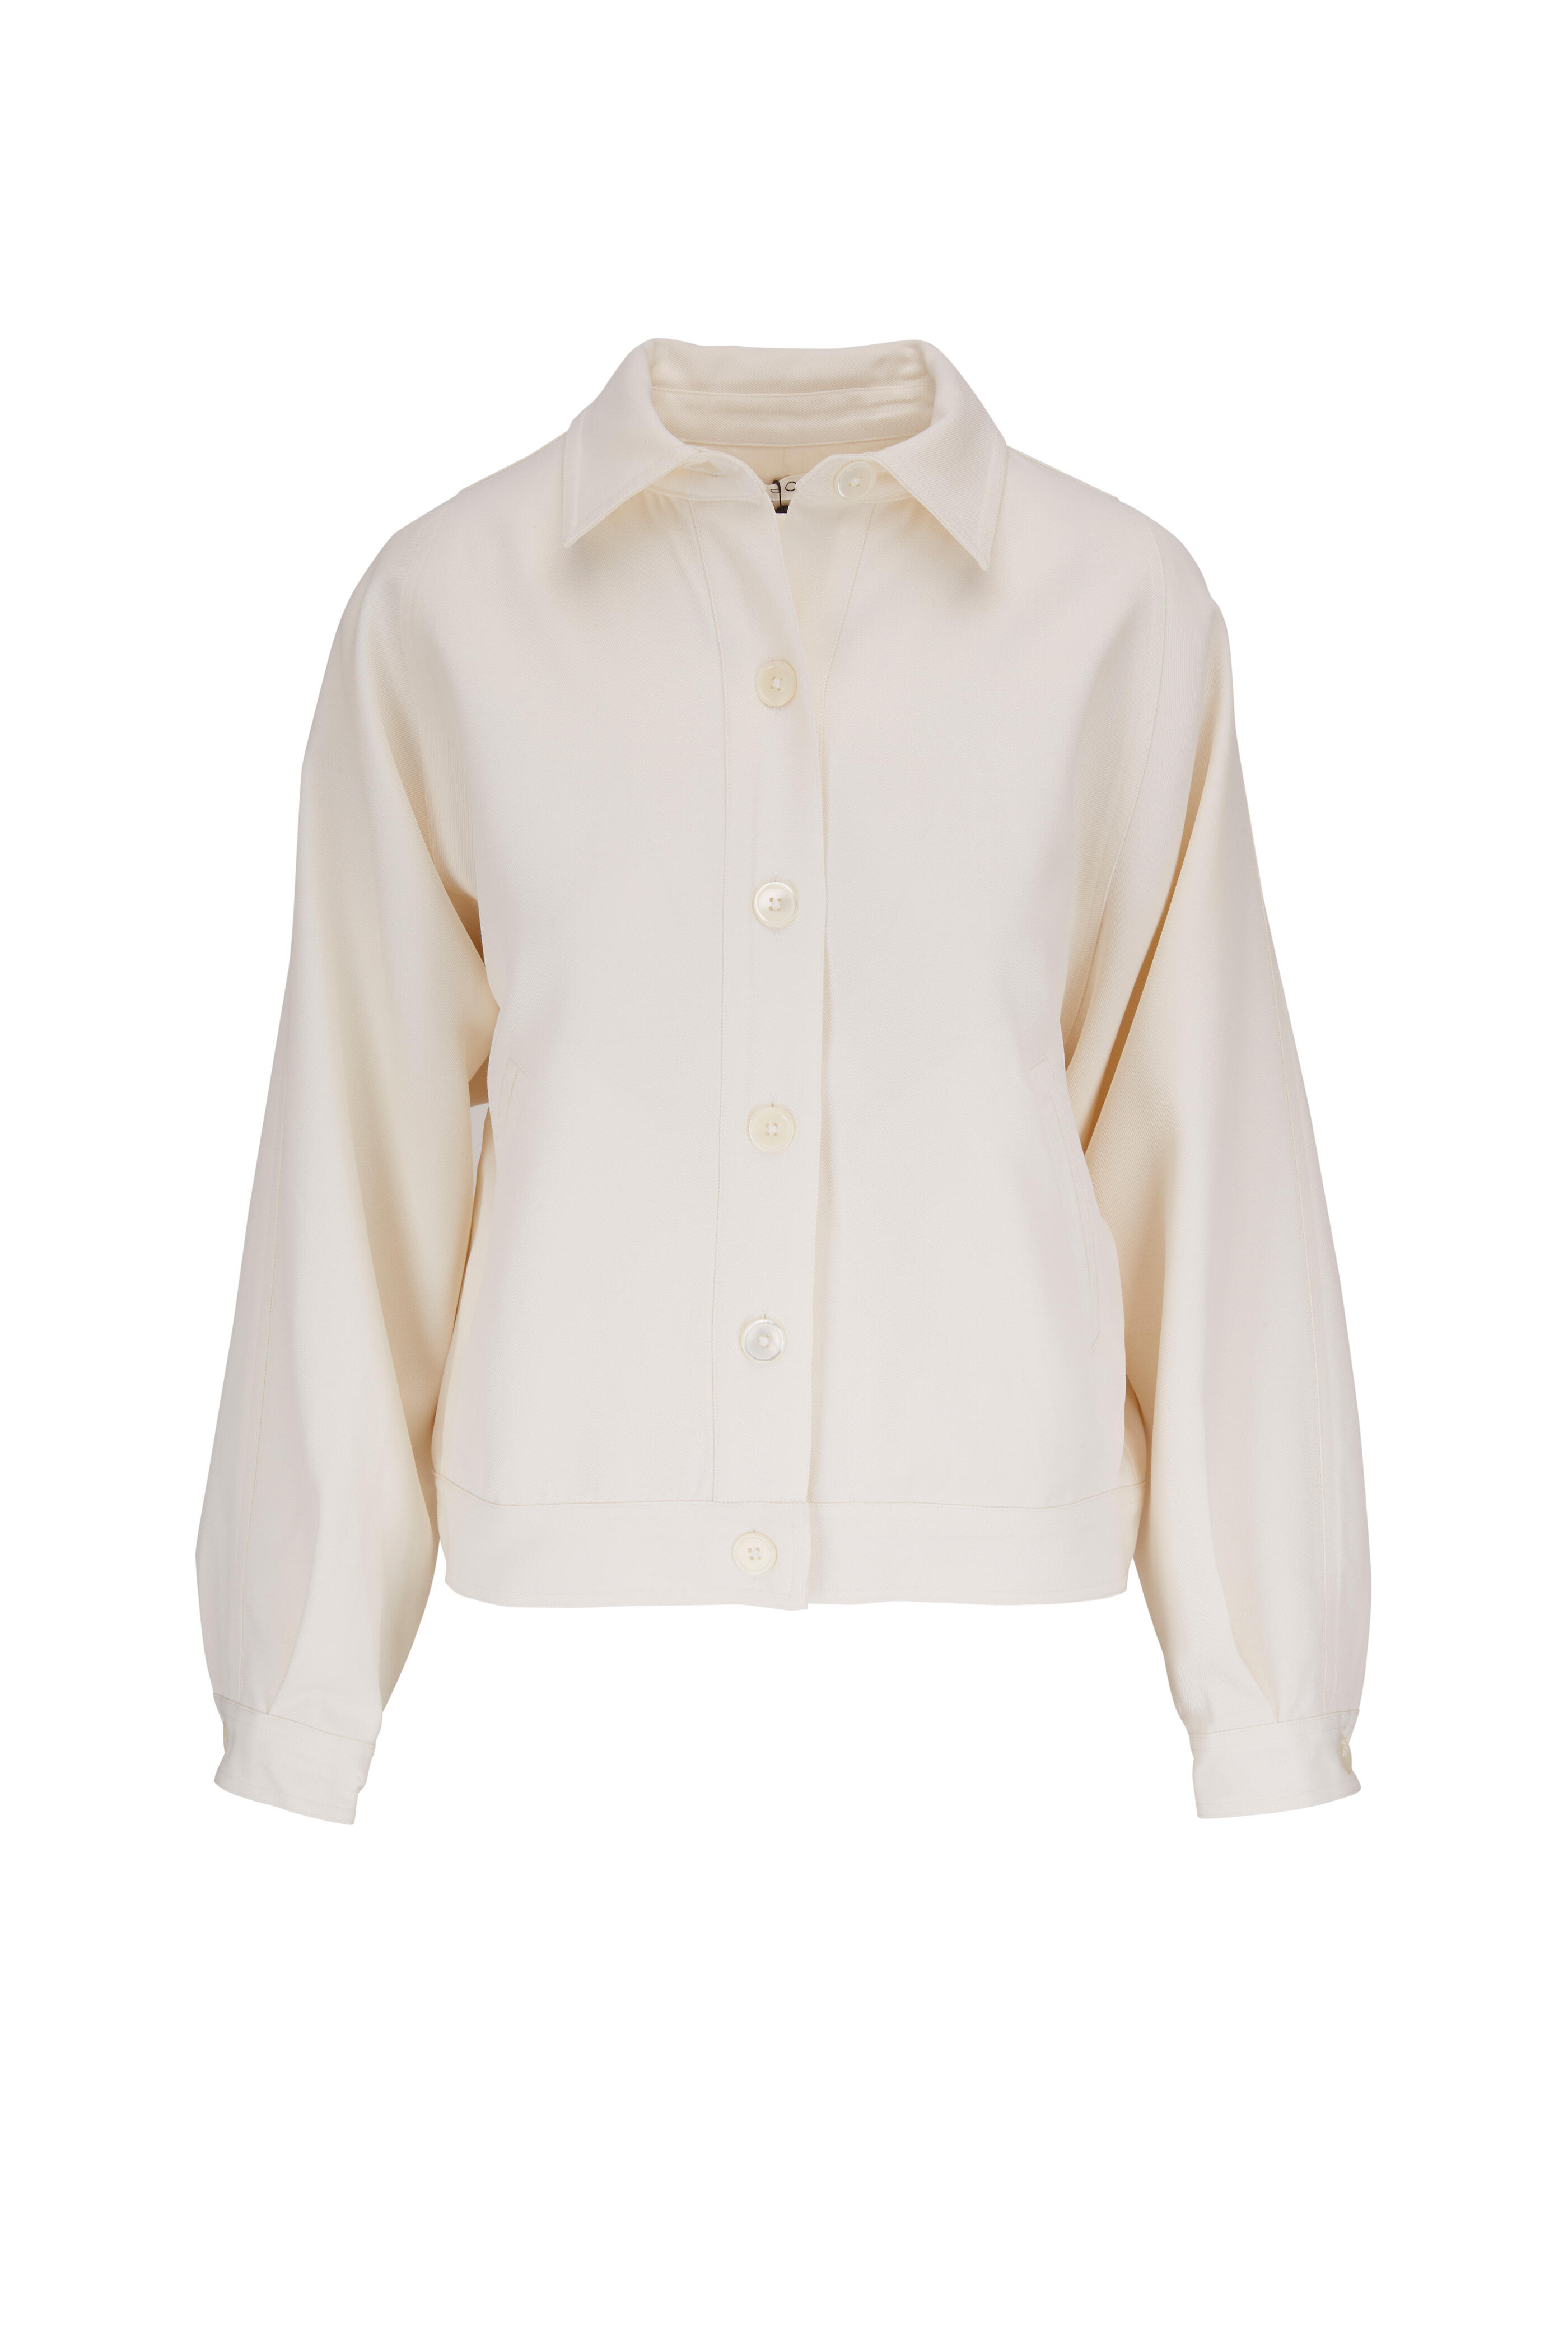 CO Collection - Ivory Curved Armhole Jacket | Mitchell Stores